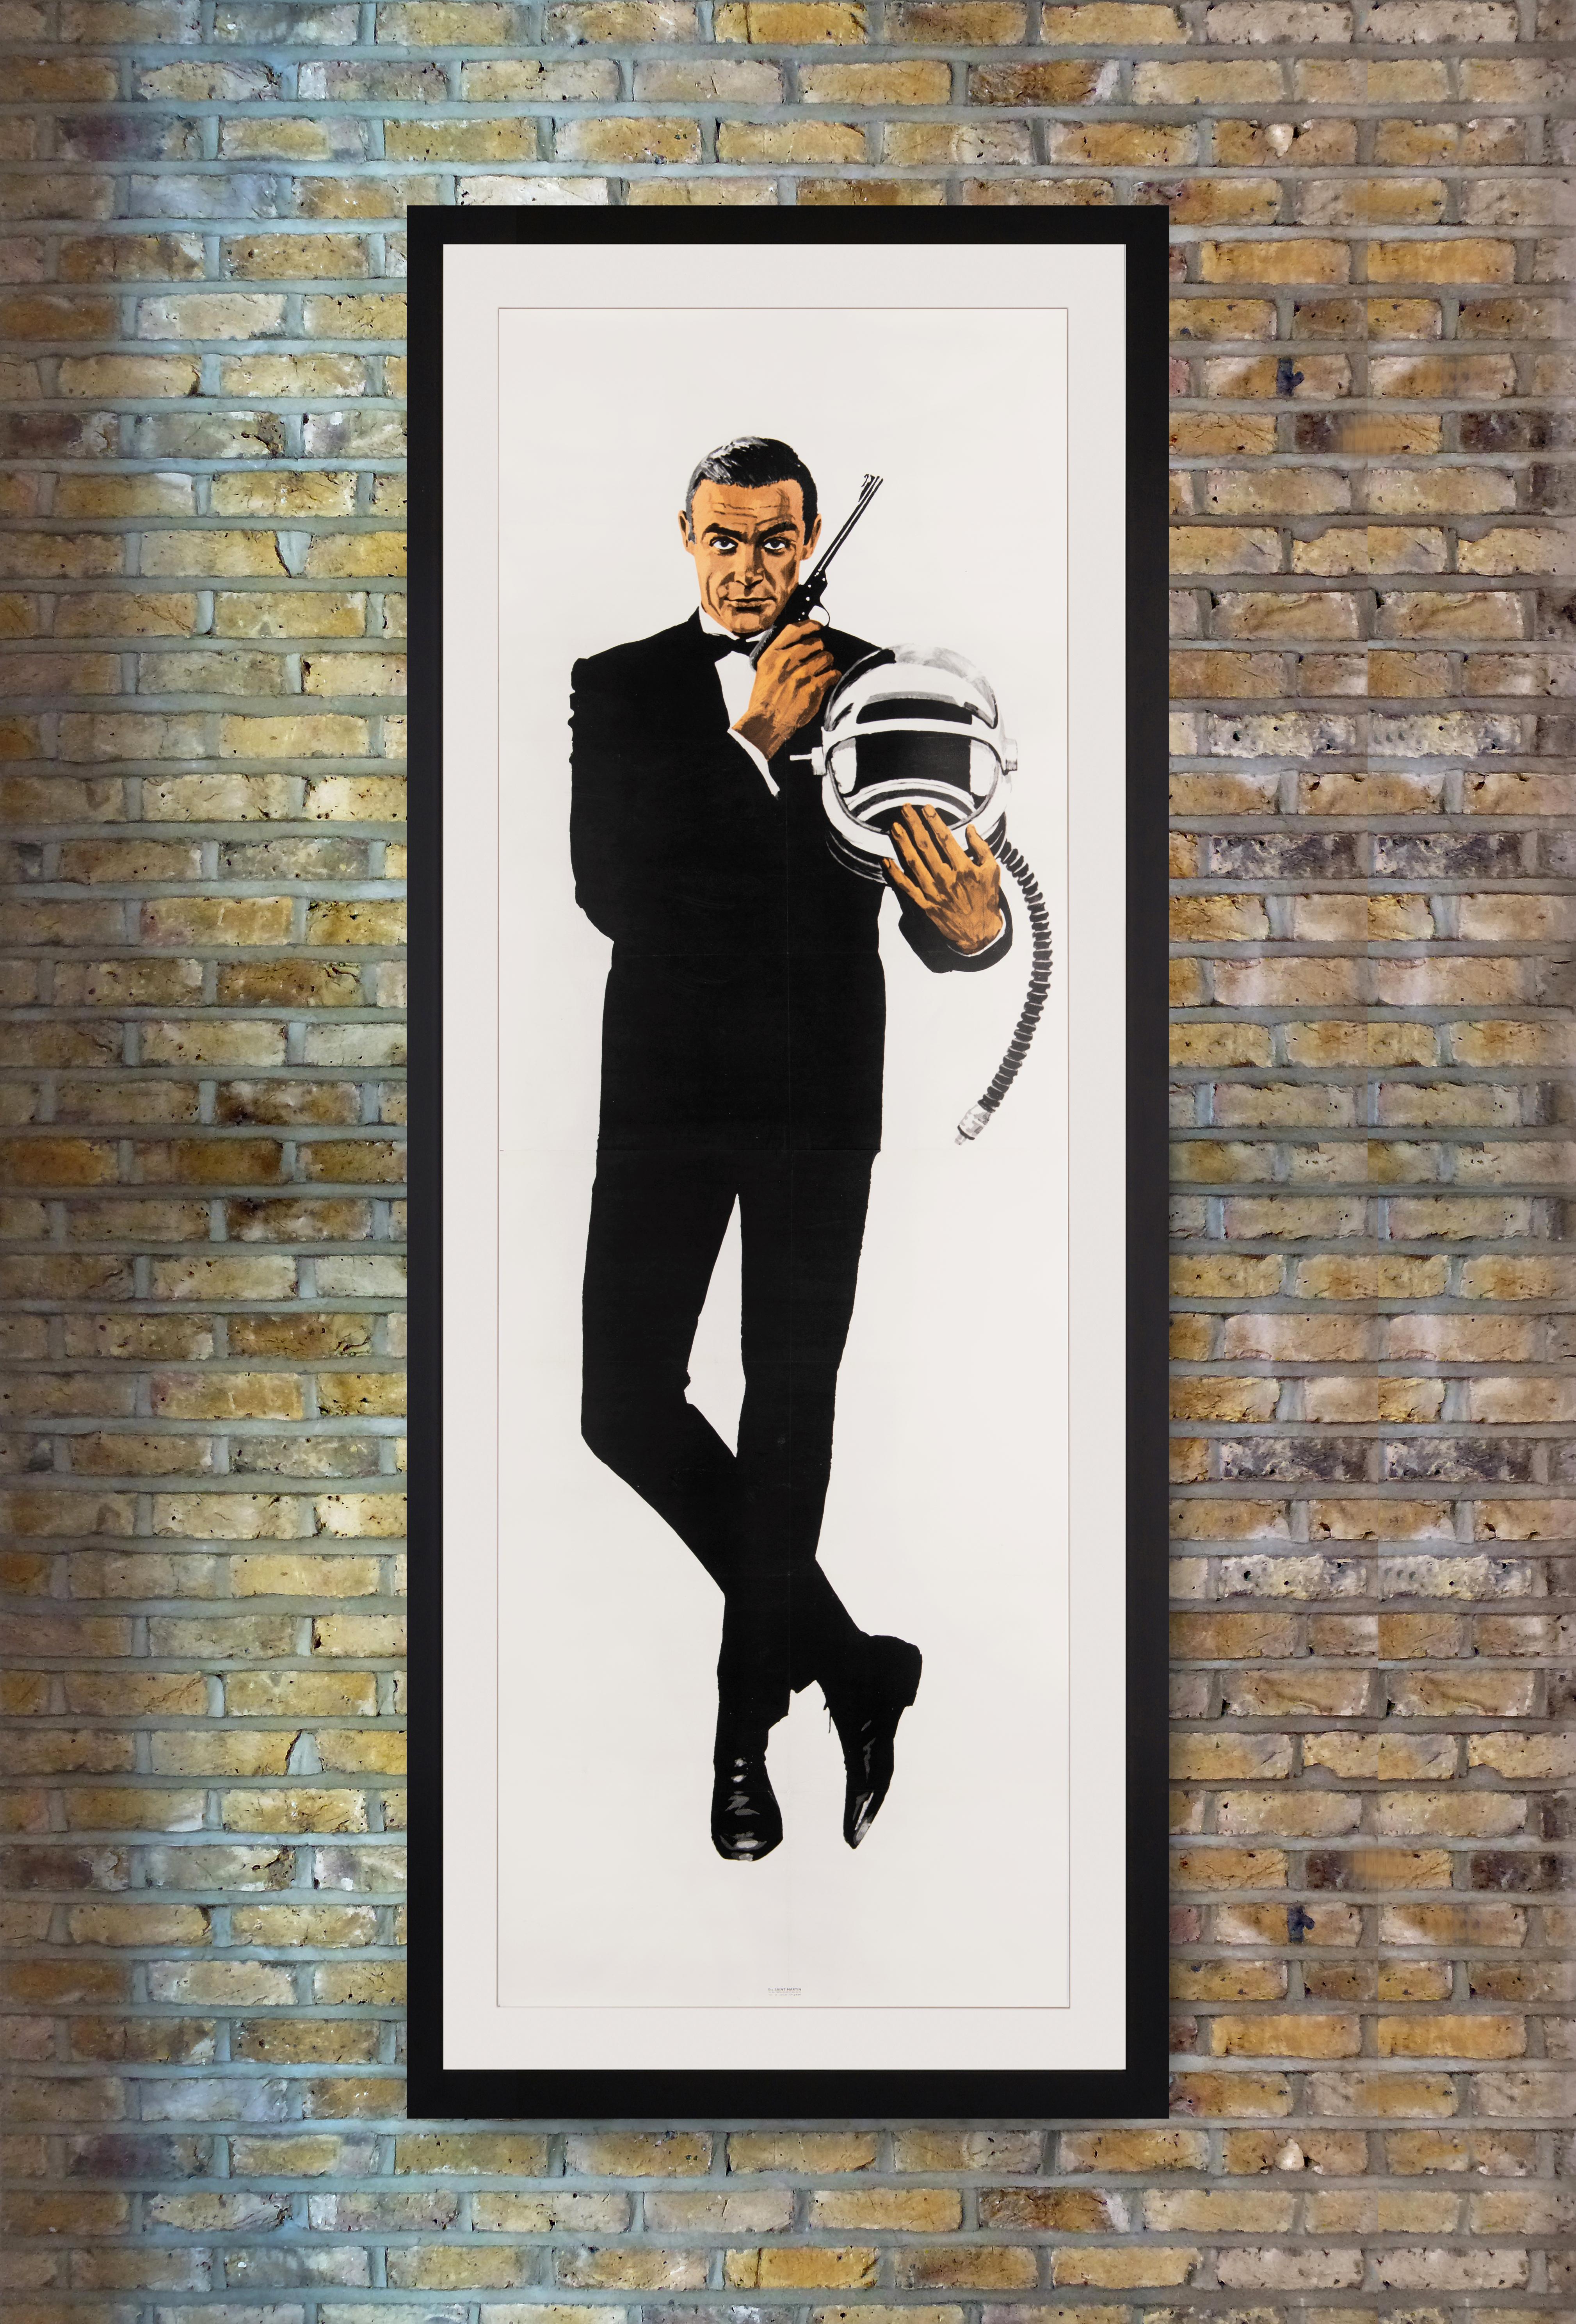 An exceptionally rare advance French door panel or 'pantalon' poster issued for the original release of 'You Only Live Twice' in France, featuring a full-size portrait of Sean Connery as James Bond in classic 007 pose, suavely suited with his